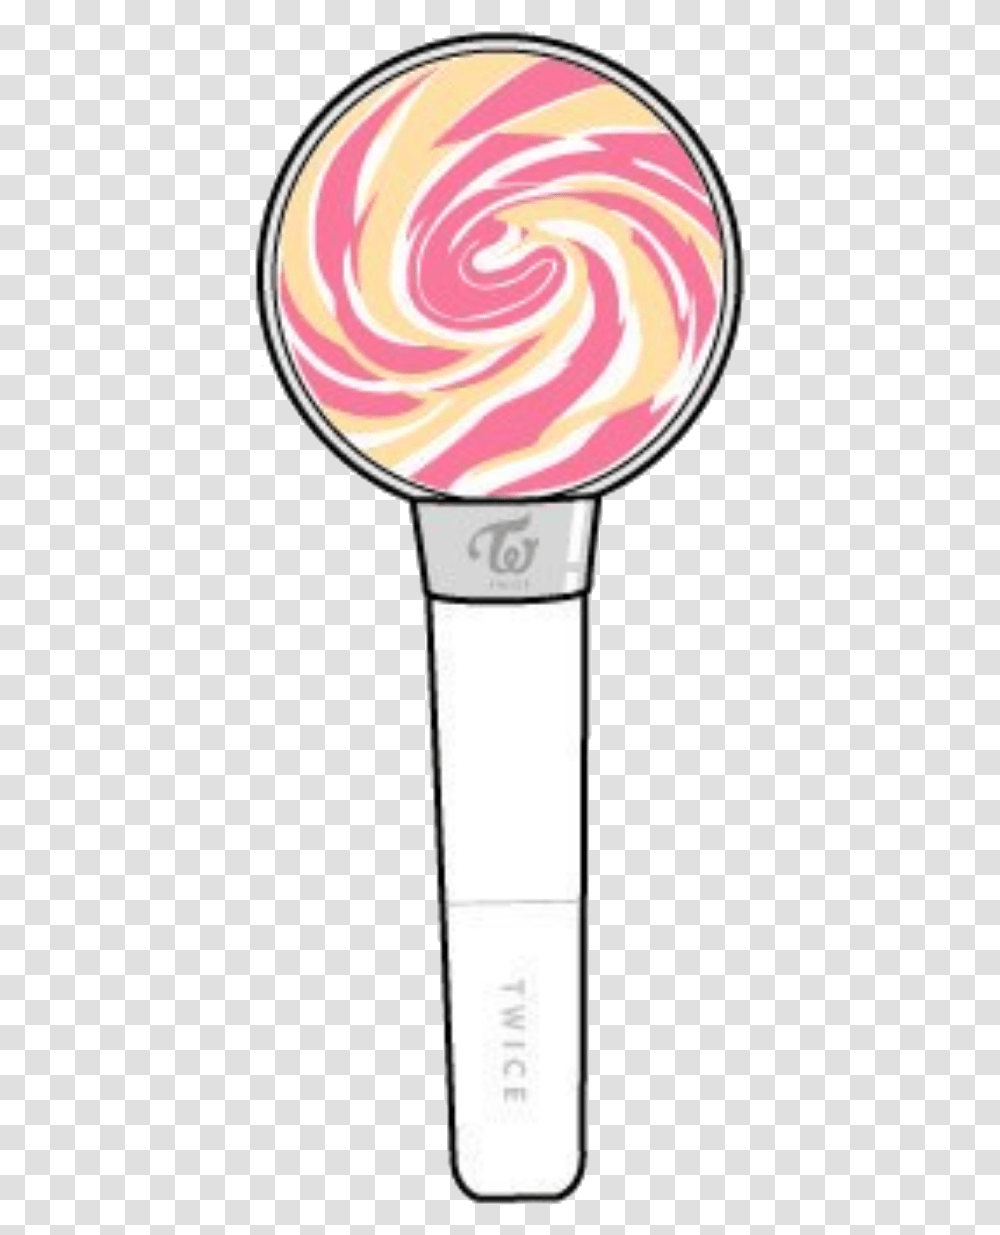 Twice Candy Bong Sticker Twice Candy Bong Sticker, Light, Food, Sweets, Confectionery Transparent Png